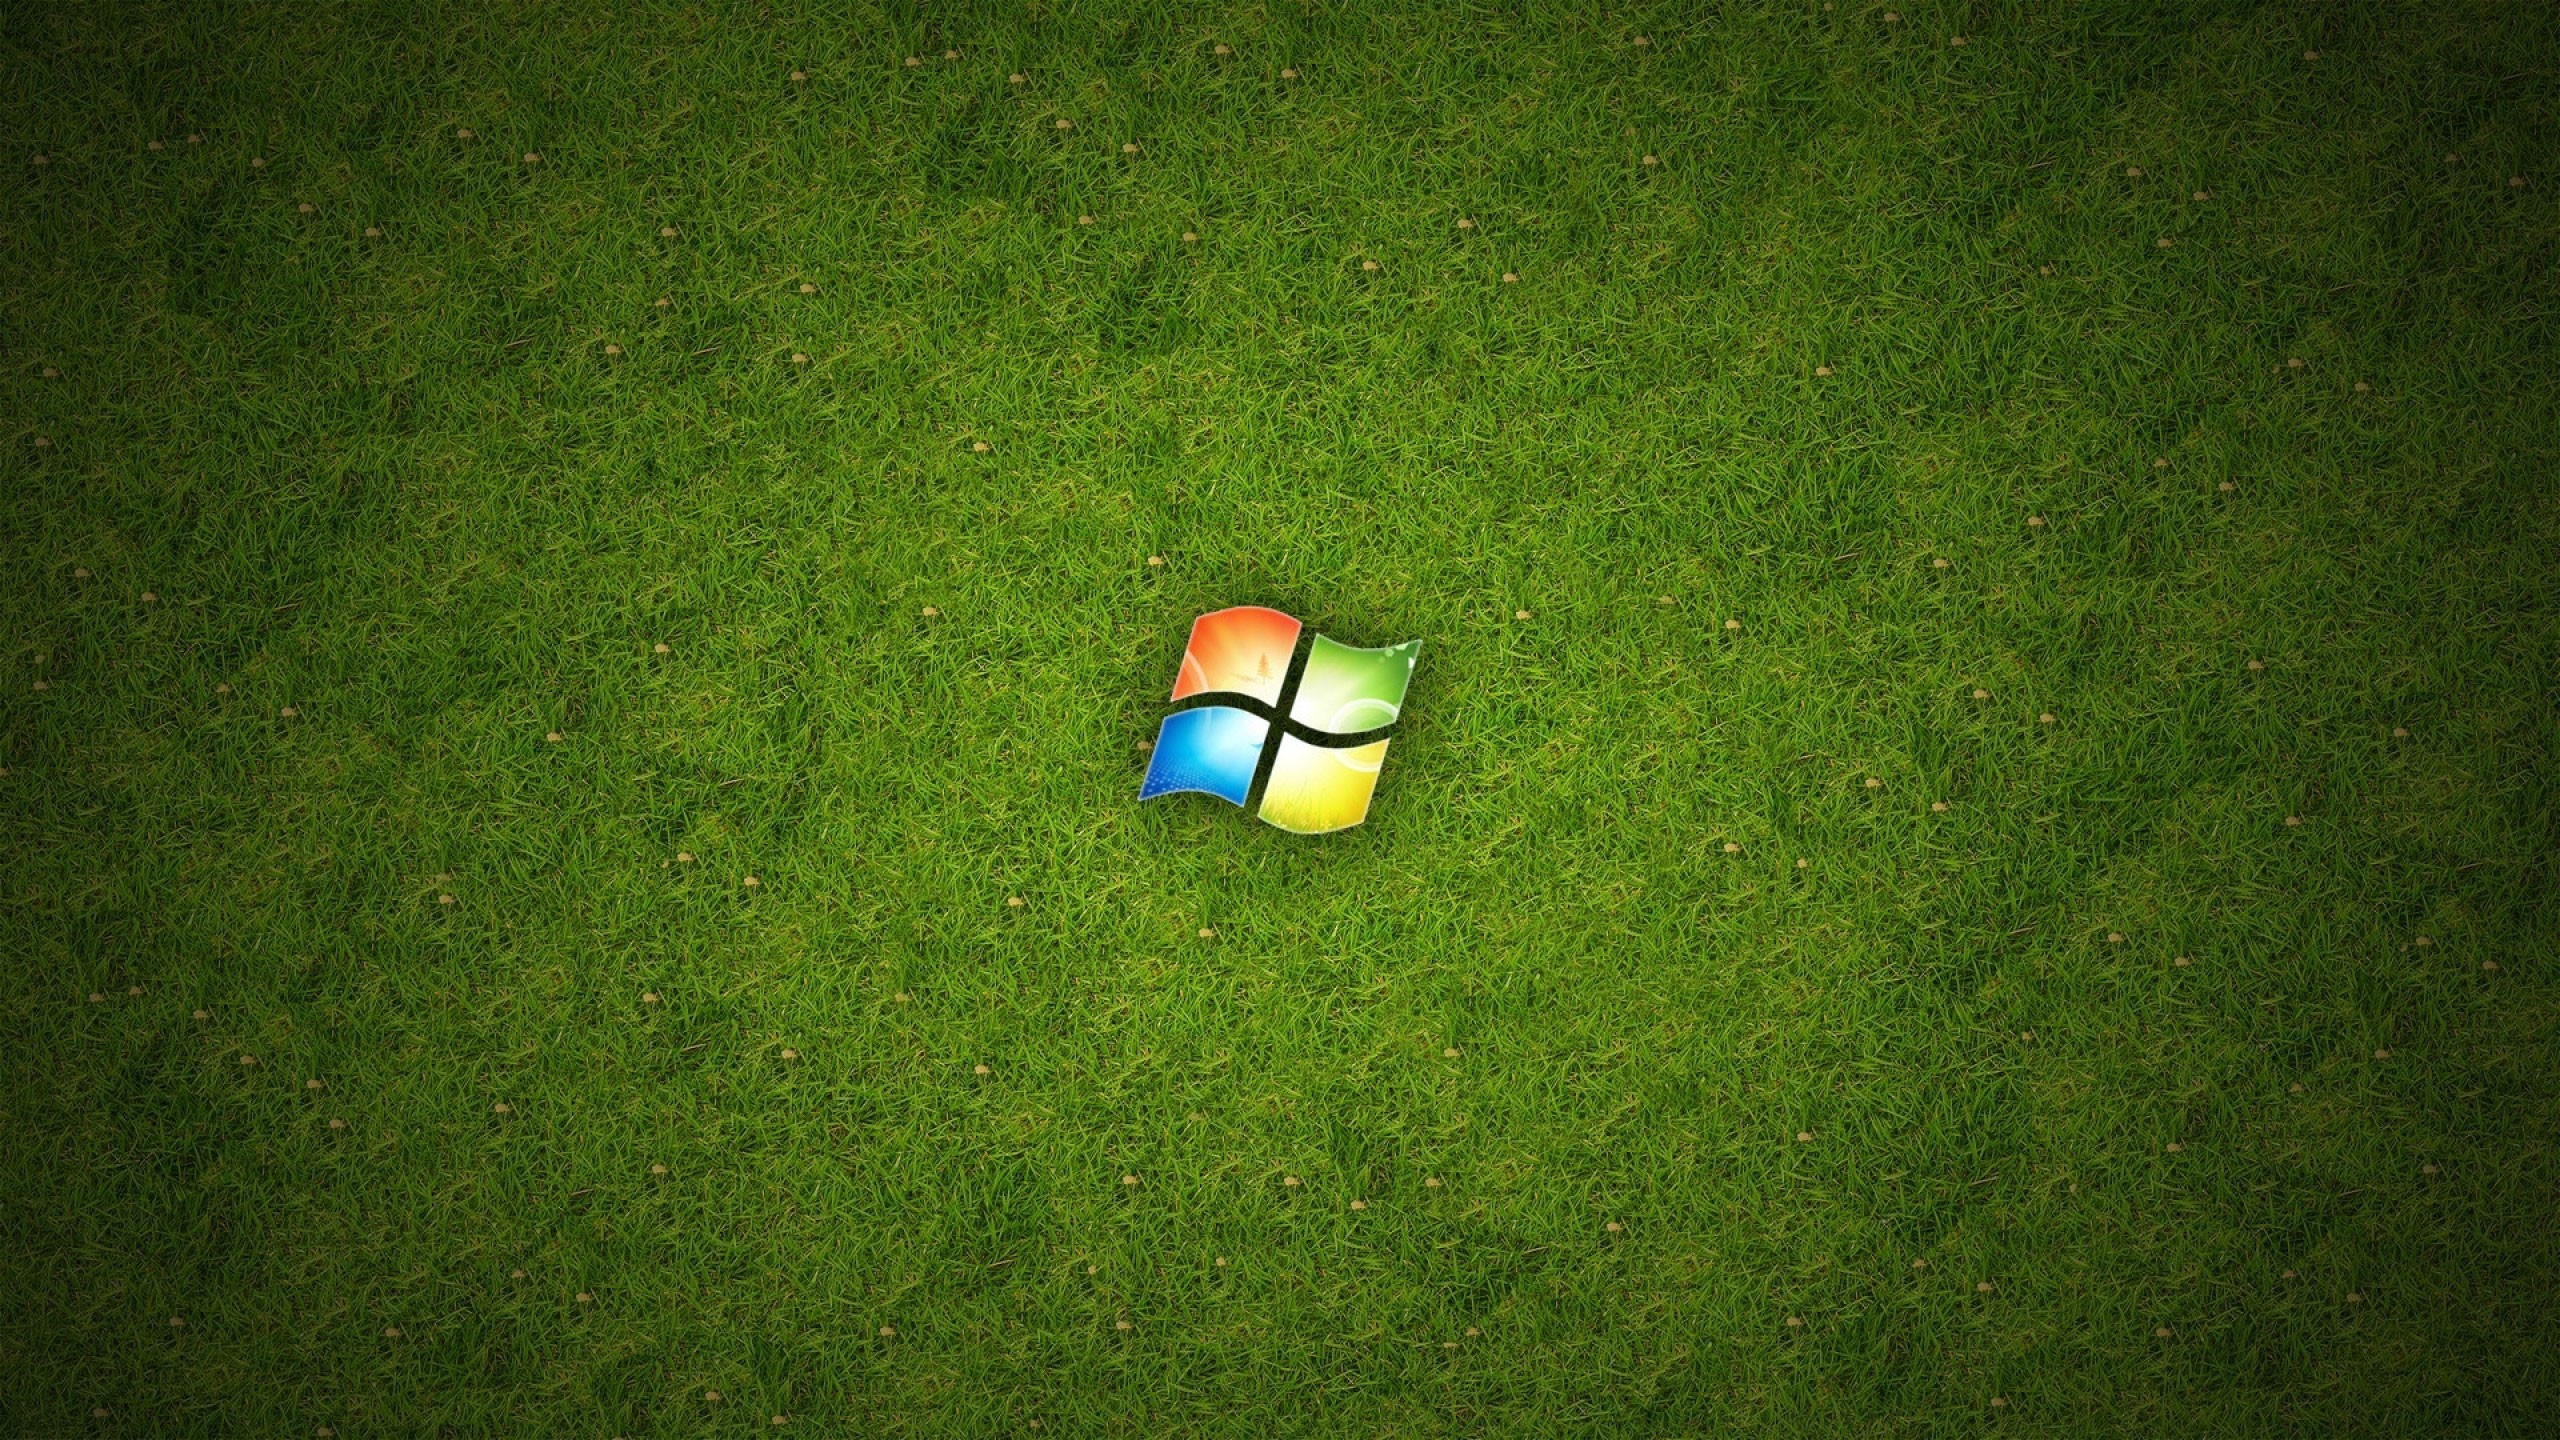 Cool Windows 7 Wallpapers   New HD Wallpapers